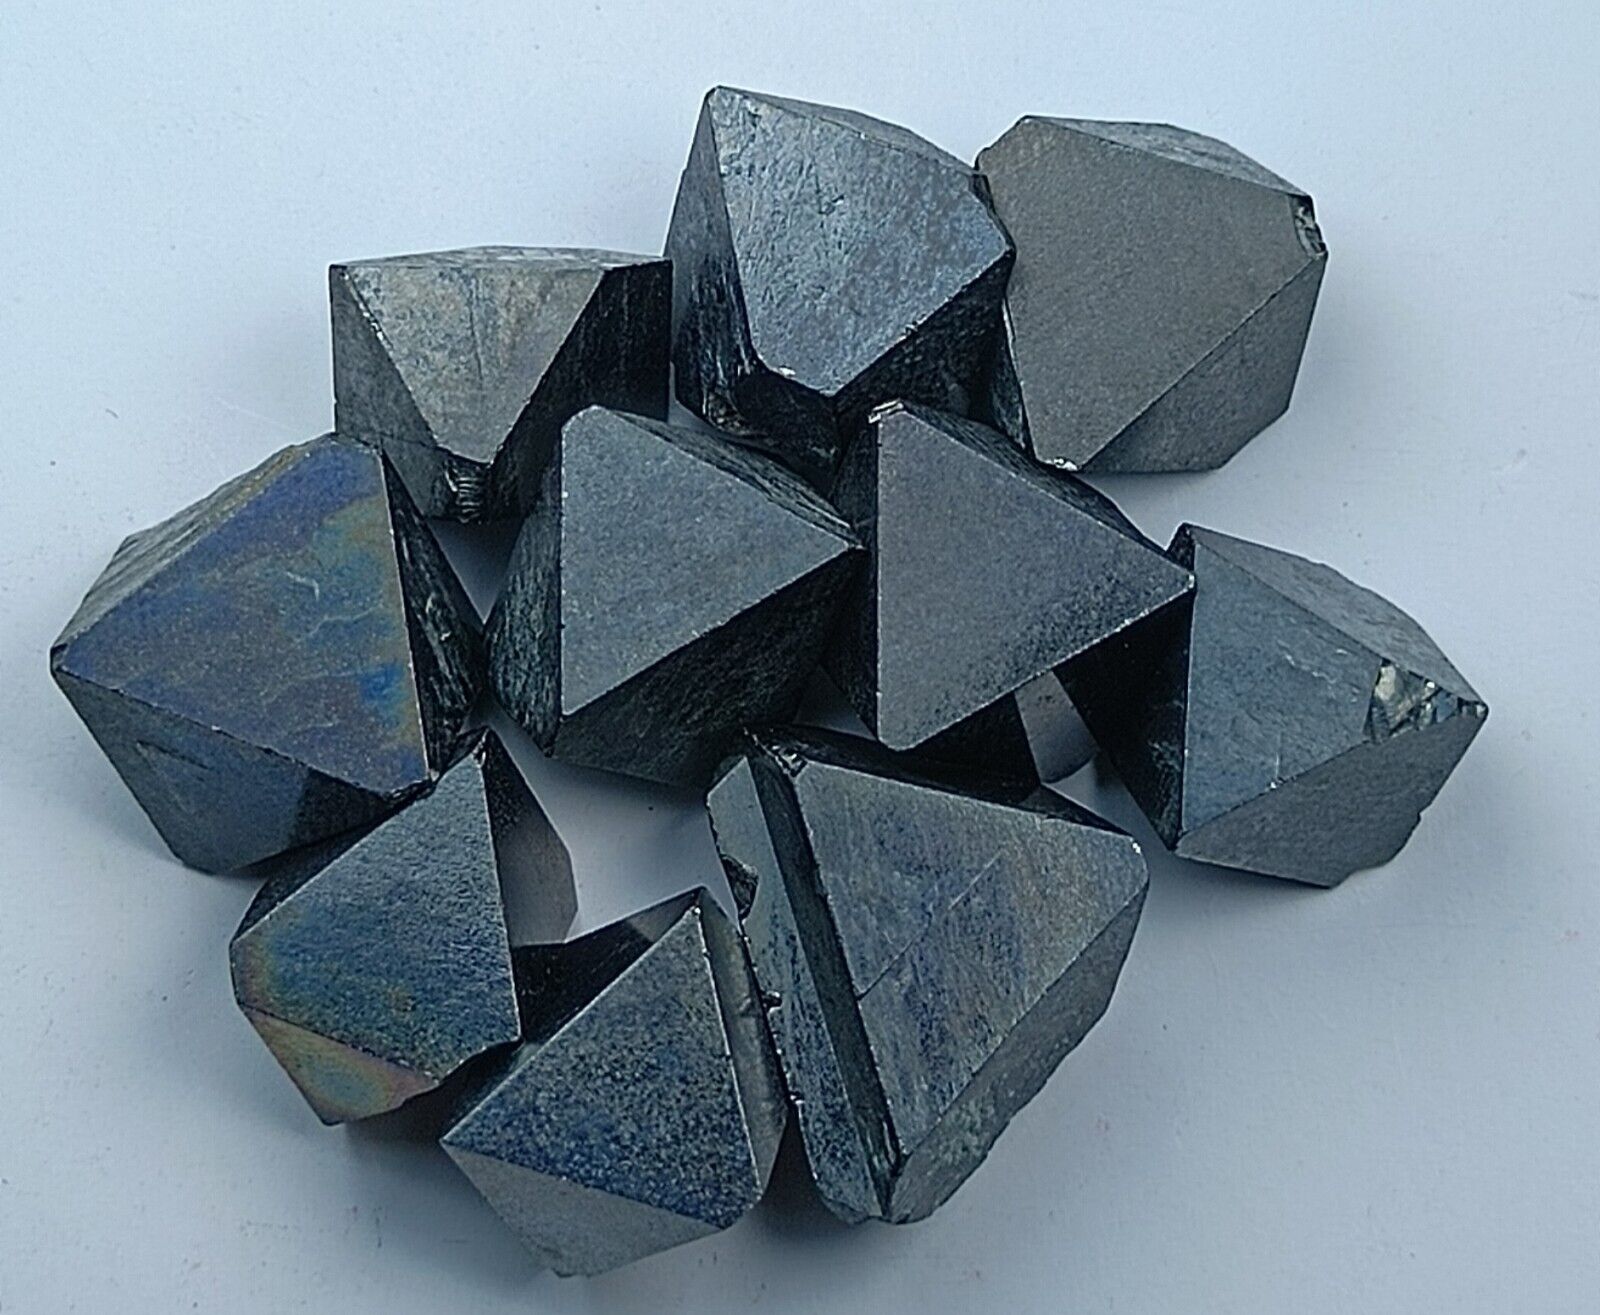 Octahedron Magnetite Crystals with good luster and terminations-Skardu Pakistan